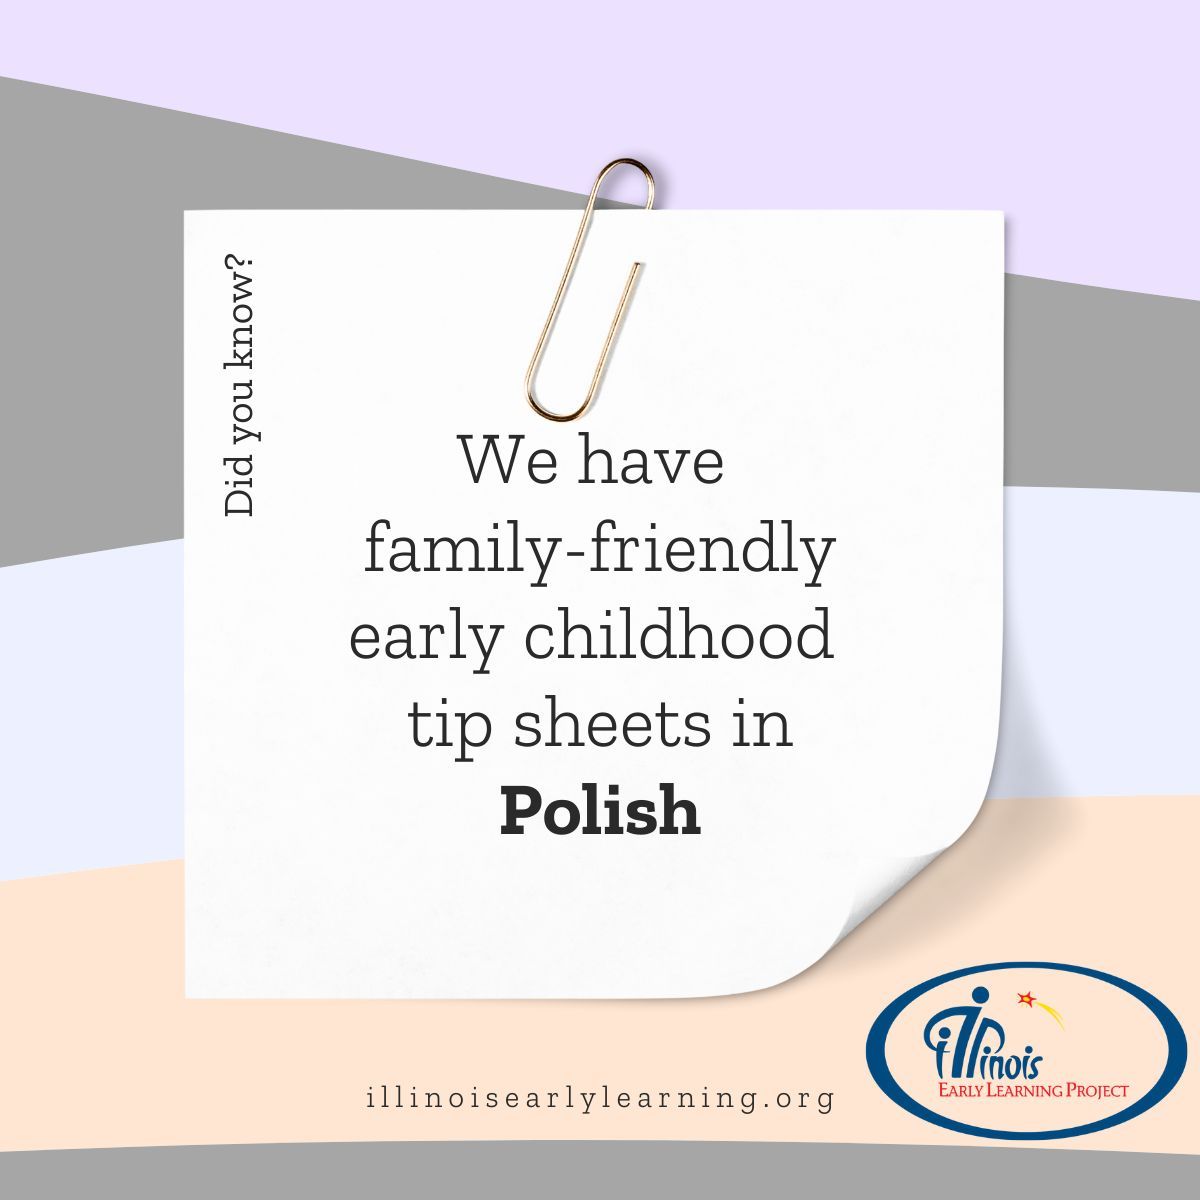 Did you know?
We have family-friendly early childhood tip sheets in Polish.
#IllinoisEarlyLearning
illinoisearlylearning.org/pl/welcome/